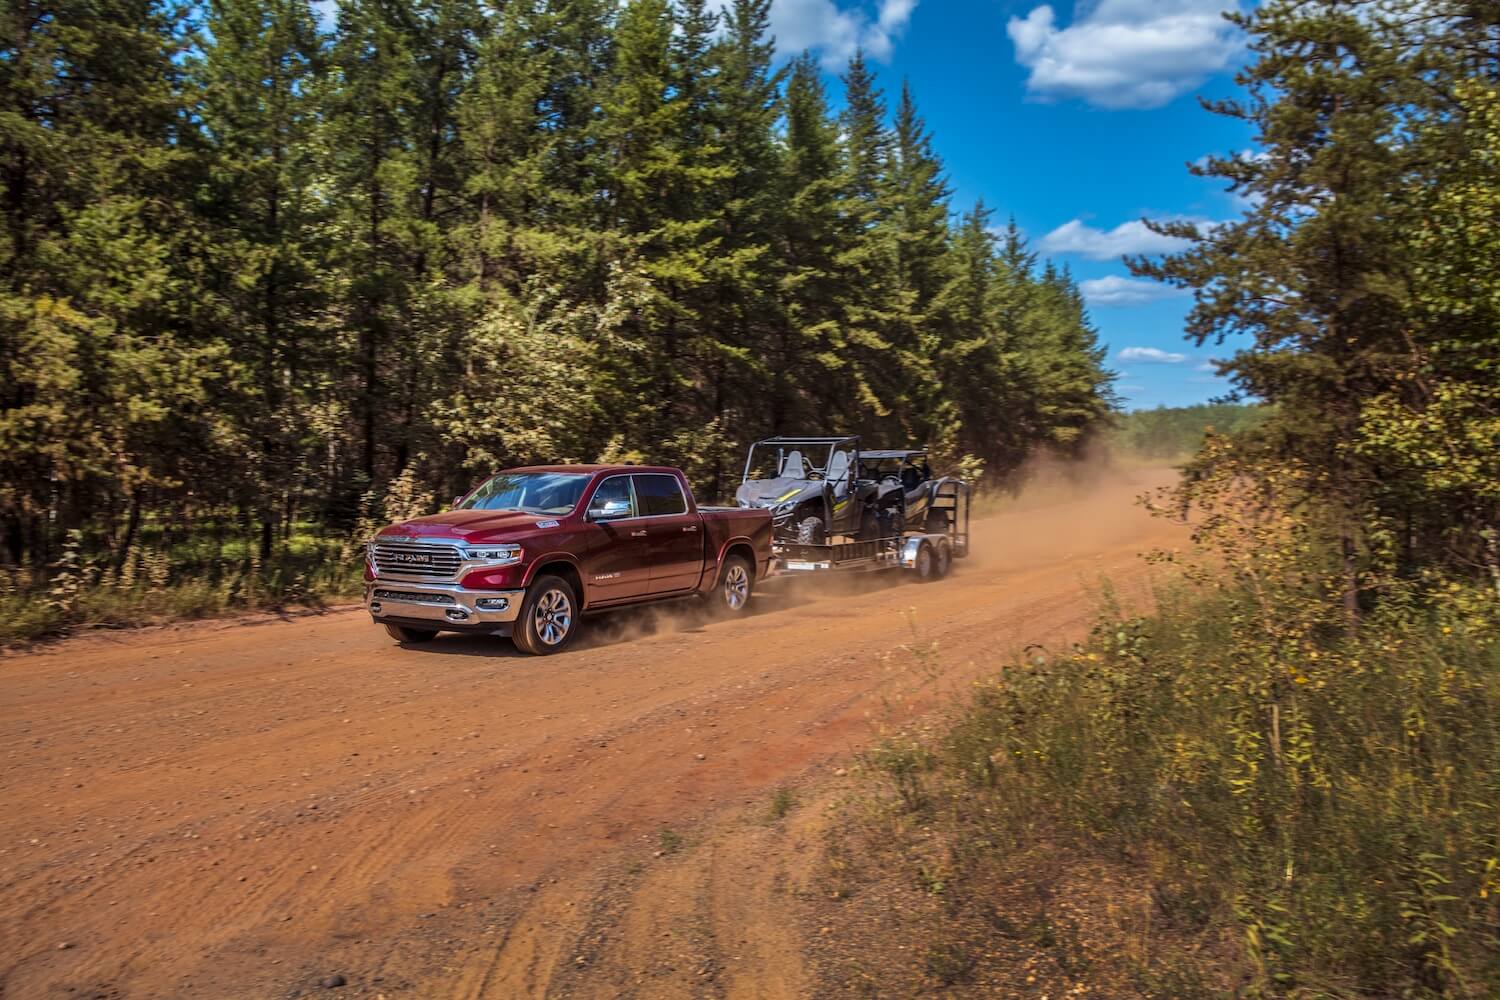 A red 5th-gen Ram 1500 pickup truck pulls a trailer down a dirt road, pin trees visible in the background.